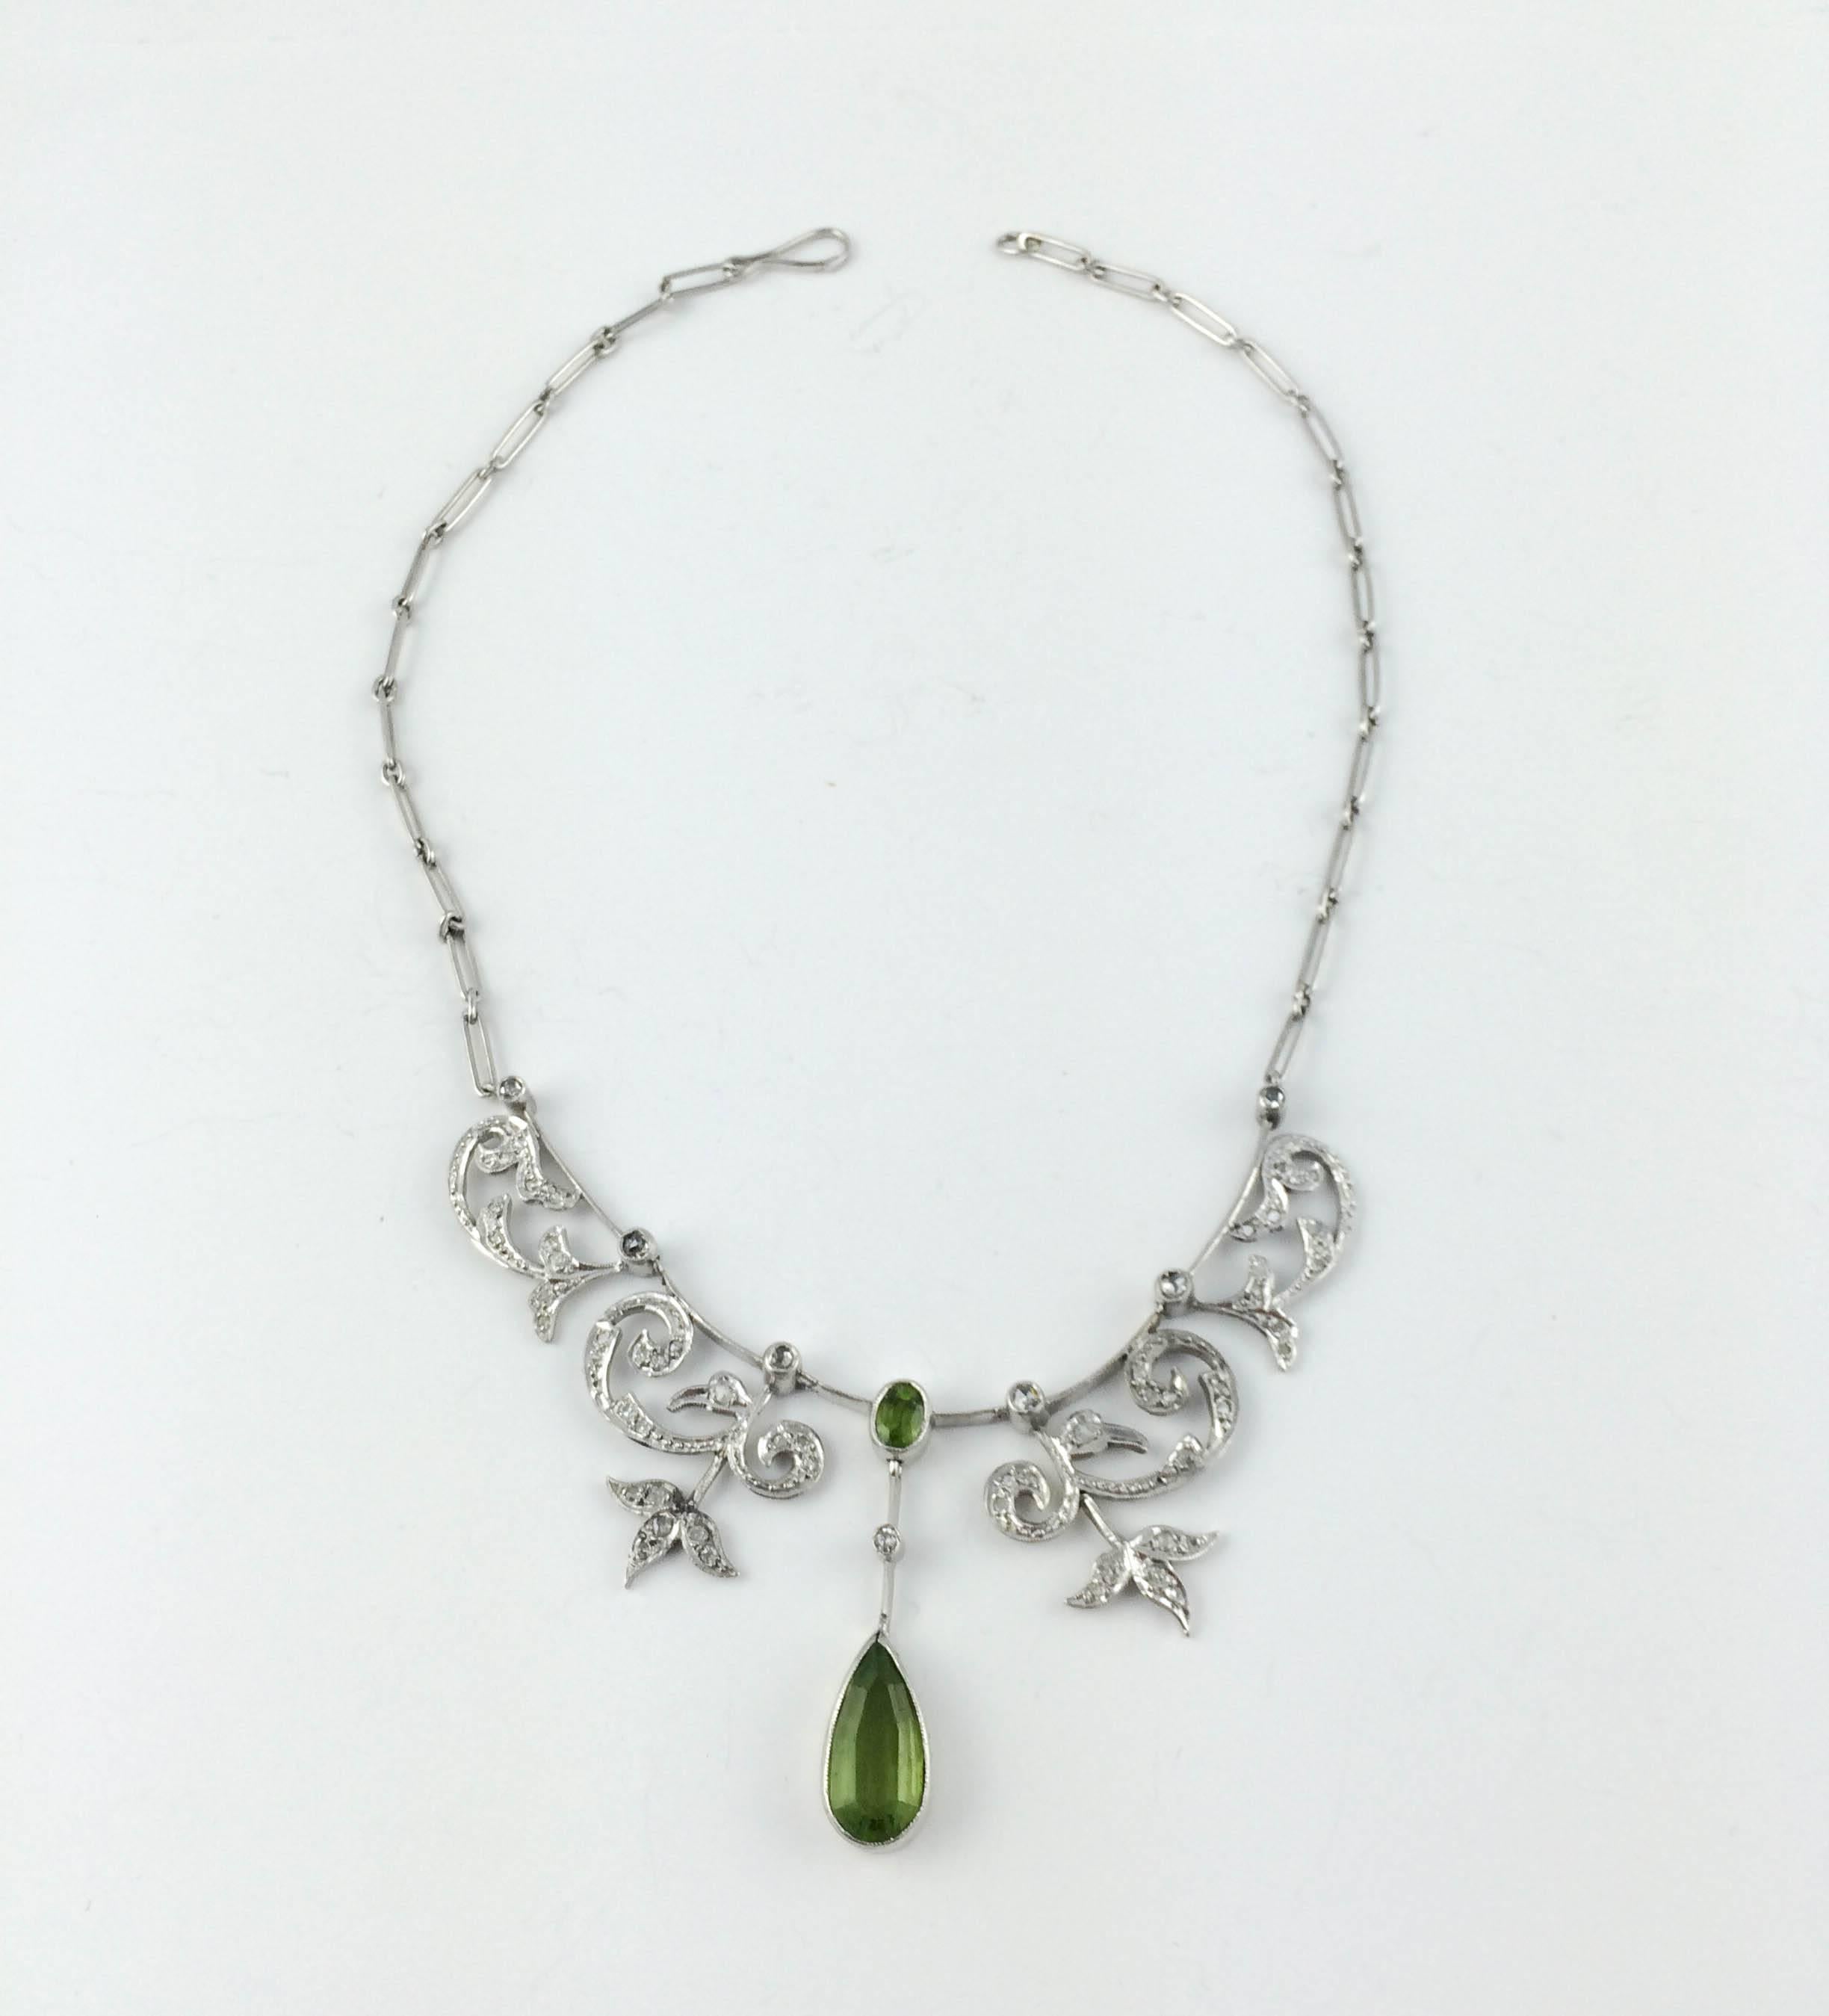 Dashing Vintage White Gold, Diamonds and Peridot Necklace. Stylish 1920s necklace. Great design and attention grabbing piece.

 

Period: 1920s

Origin: Europe

Materials: 9ct White Gold; Diamonds and Peridot

Condition: